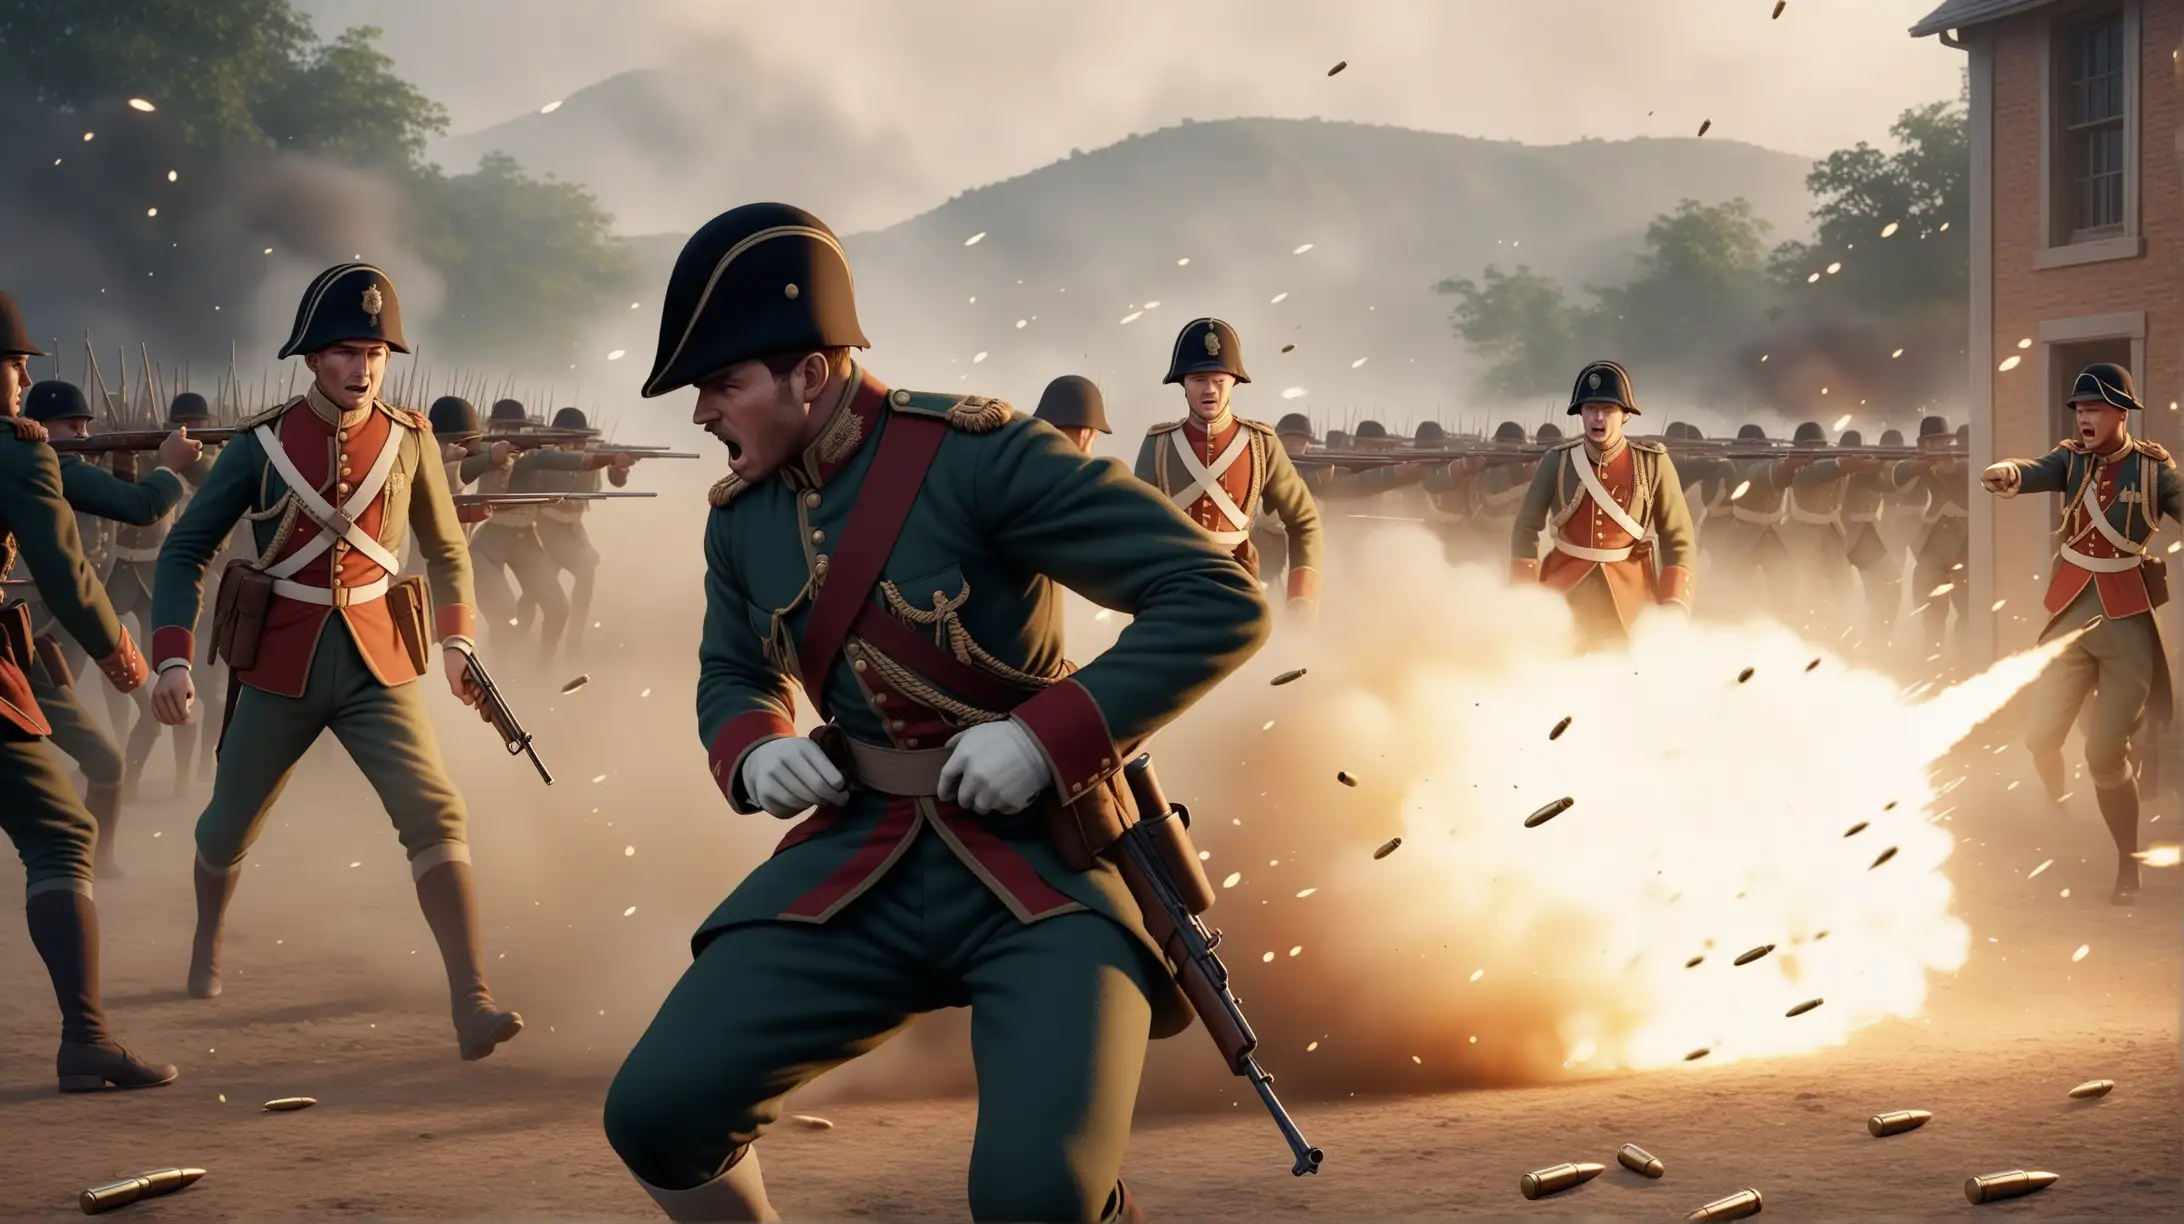 realistic cinematic, generate an image set in the 19th century colonial era, depicting scene of European looking British English Soldier in uniform getting hit by the bullets